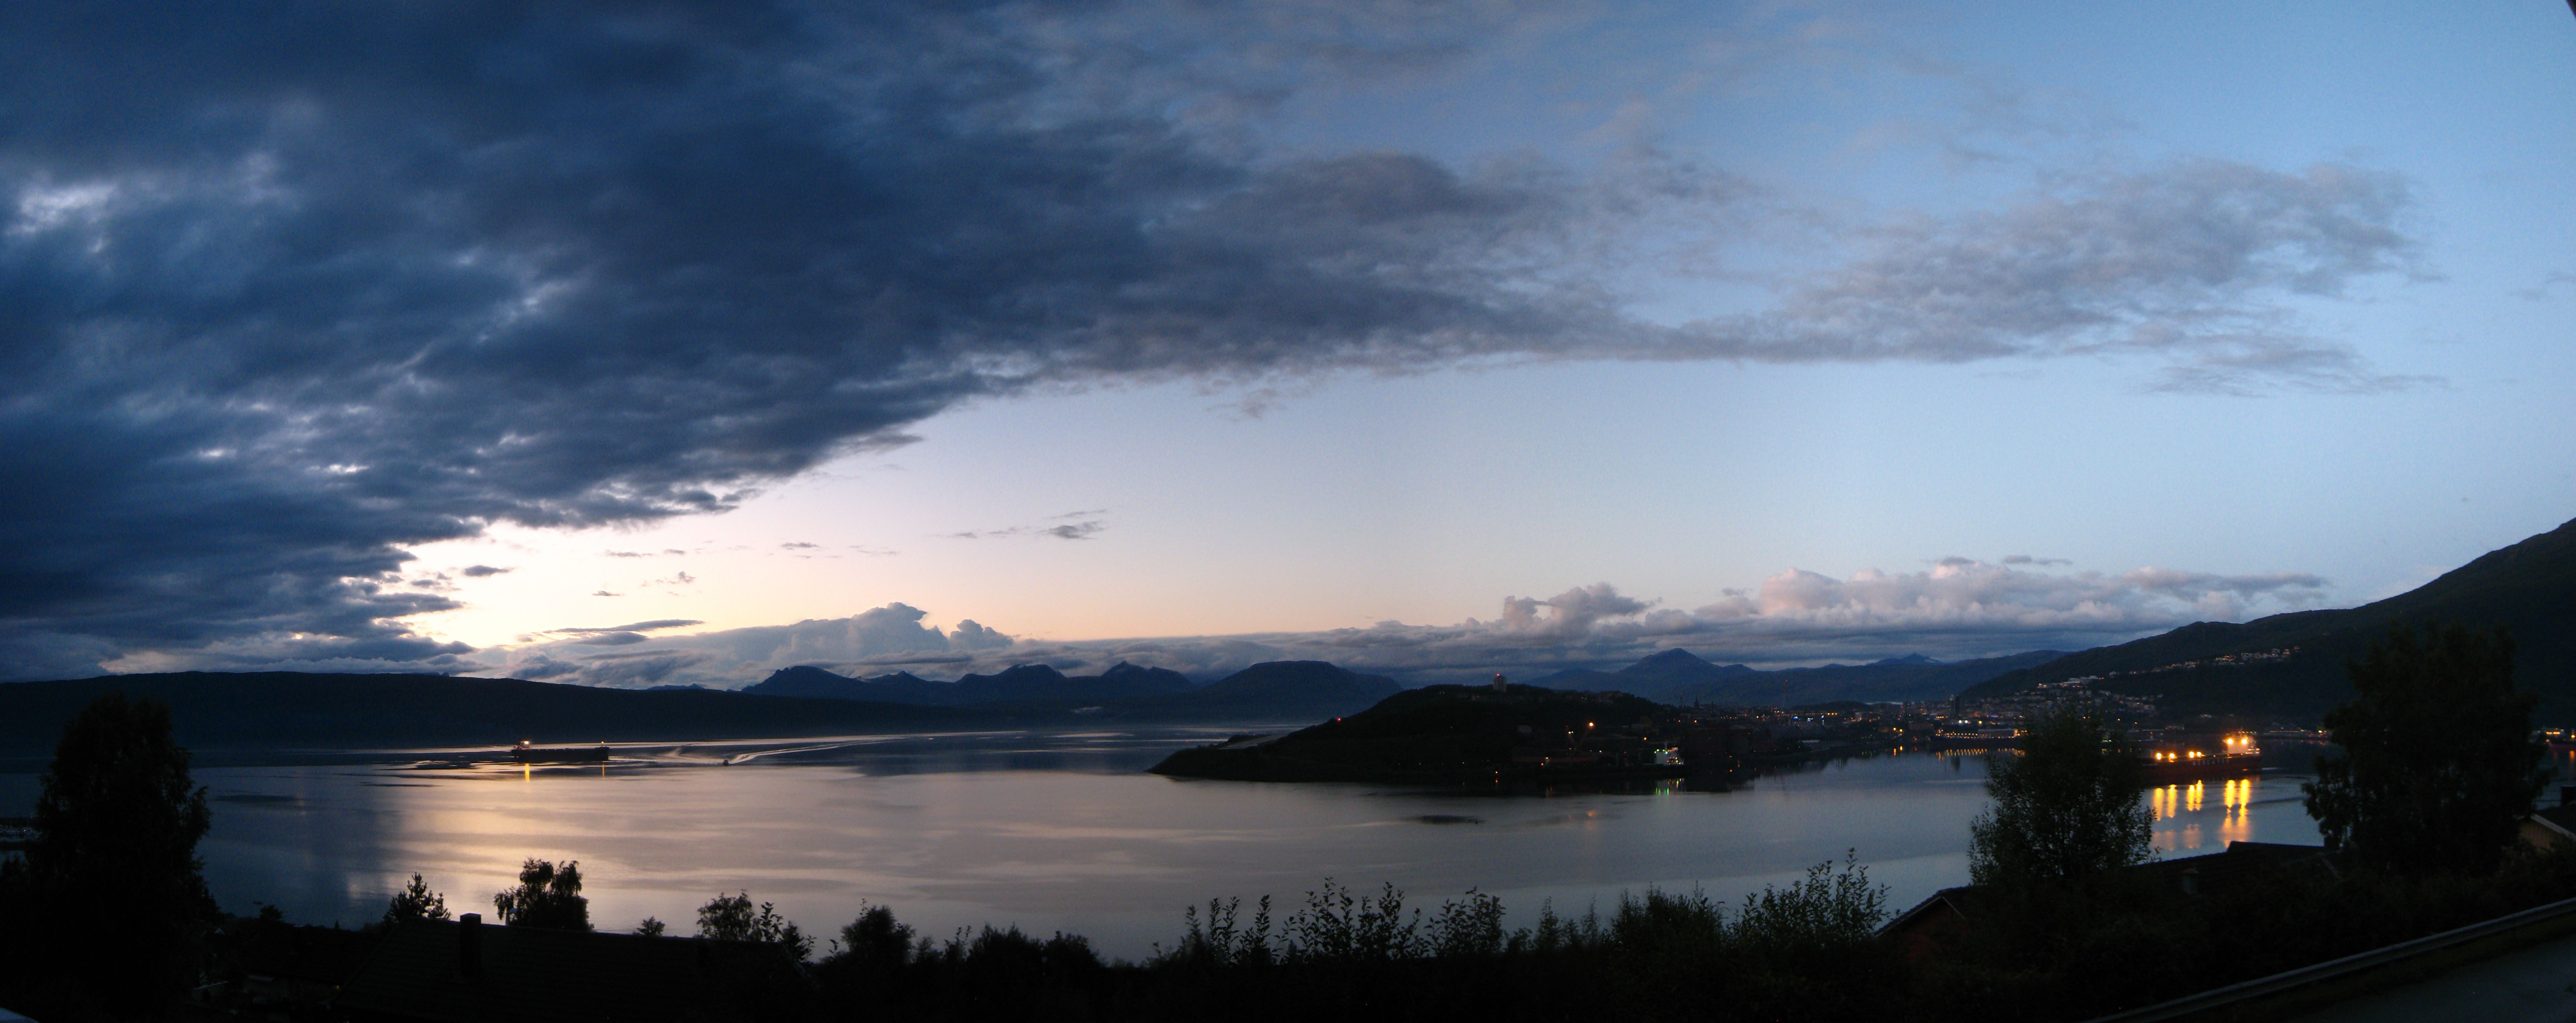 Tonight's Panorama of Ofoten Fjord with distant cumulus clouds